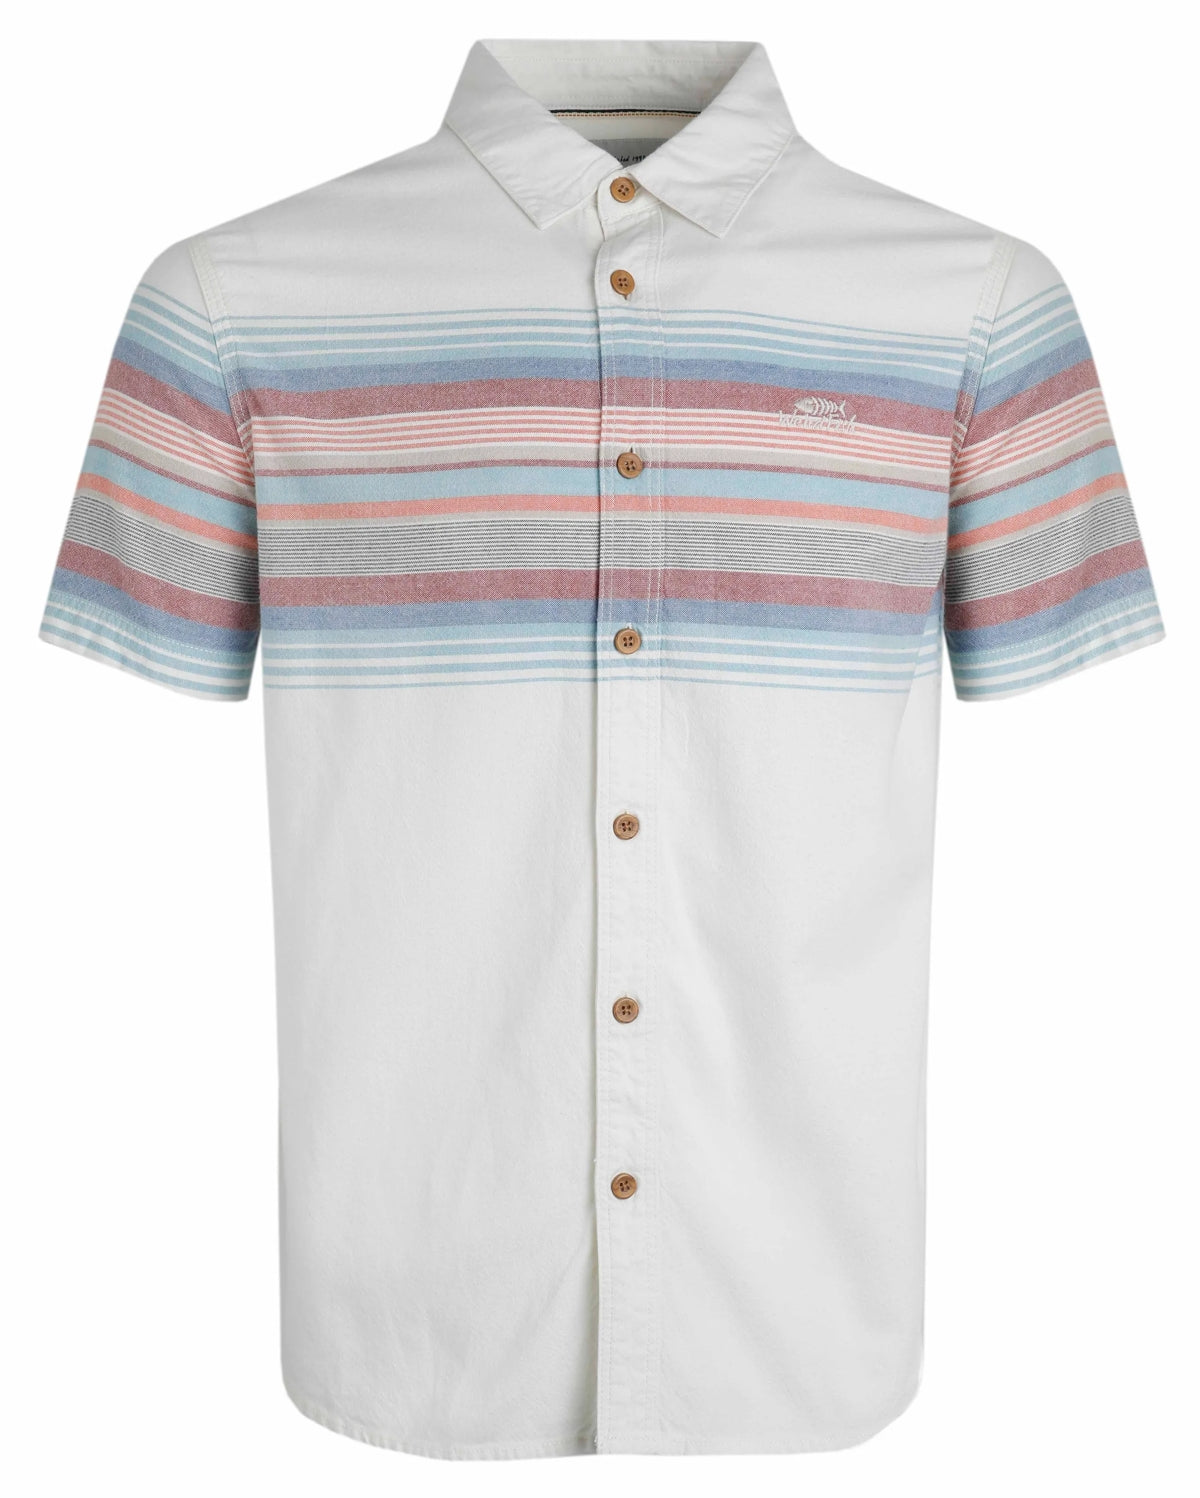 Men's Bowfell button through short sleeve shirt in Dusty White with stripe chest pattern.